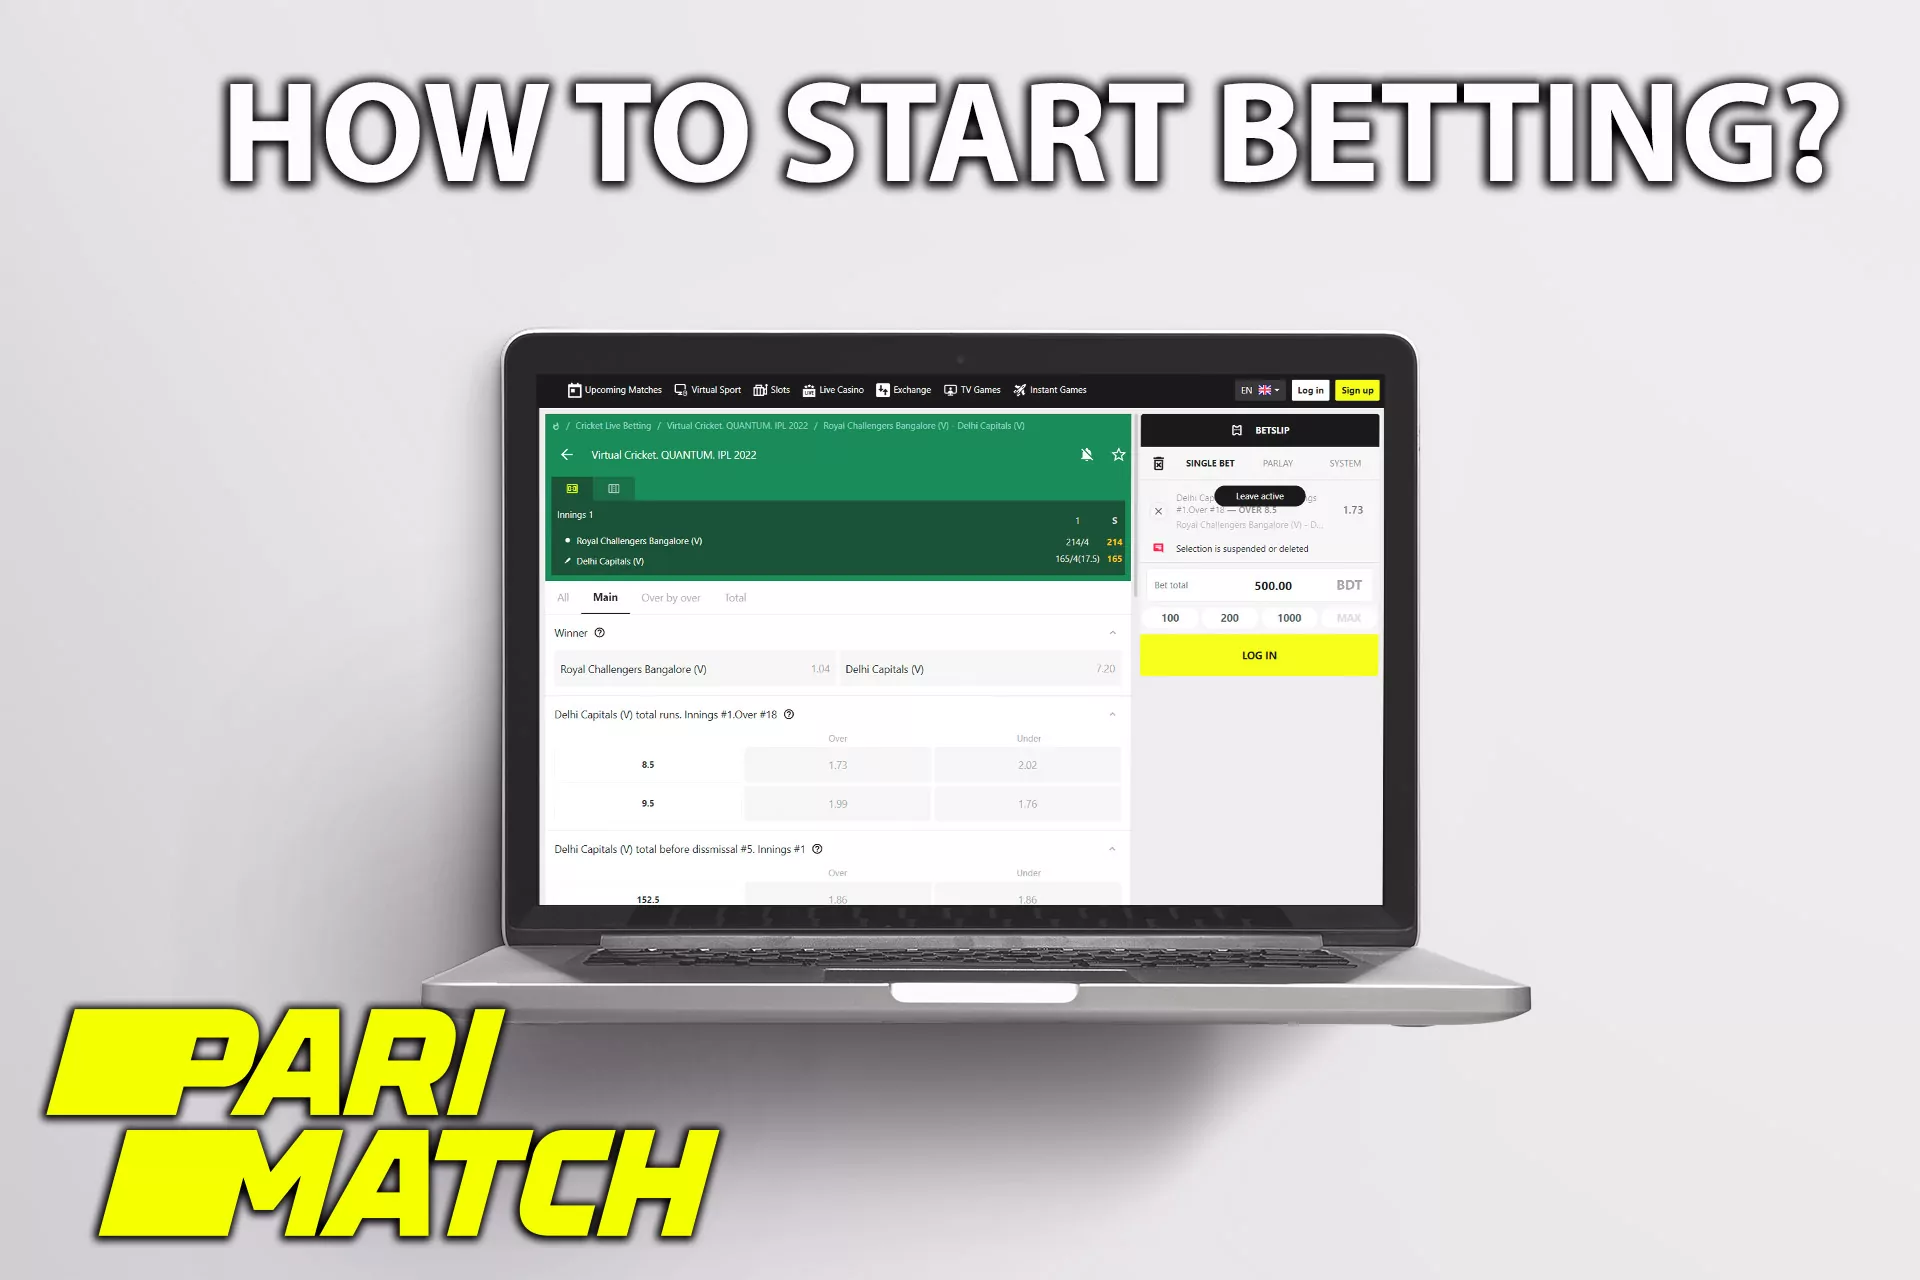 There are a few simple steps to start betting at Parimatch.